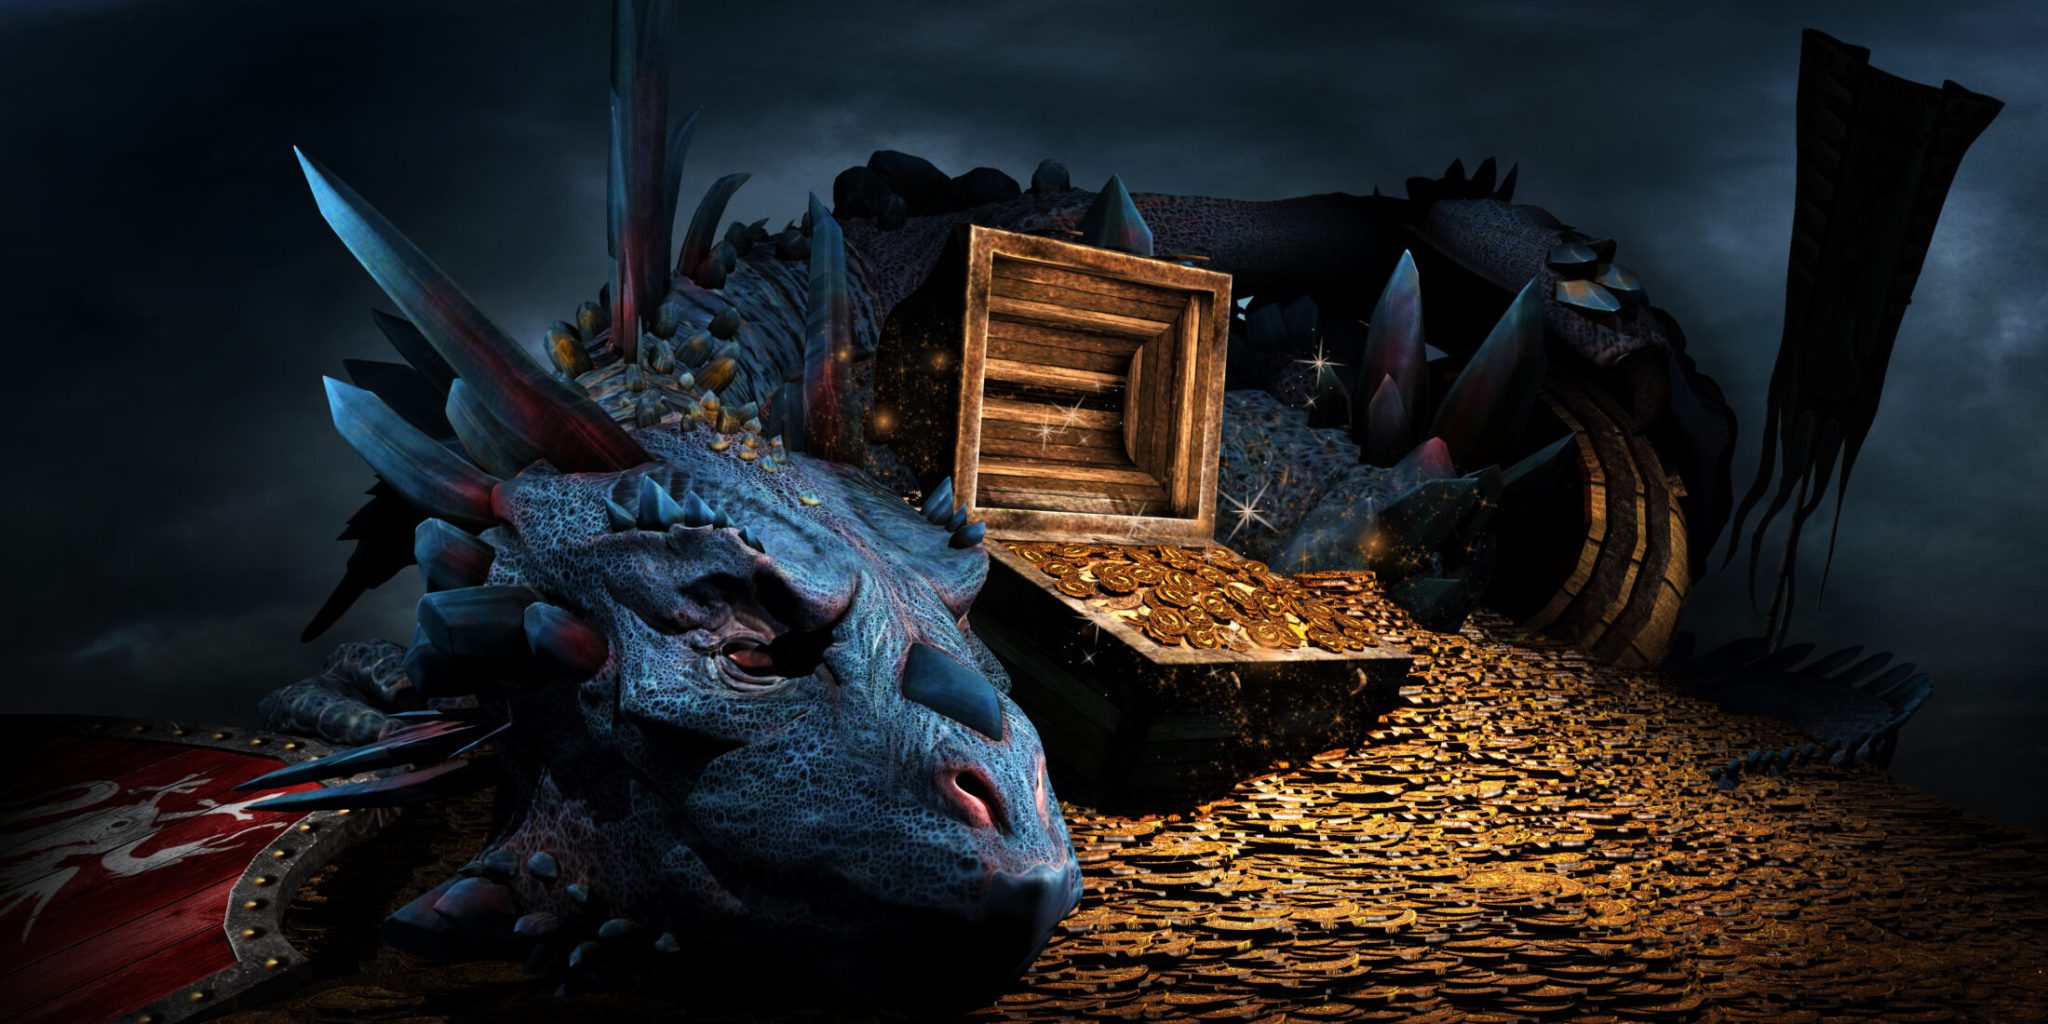 Fantasy scene with blue dragon, treasure chest and pile of golden coins